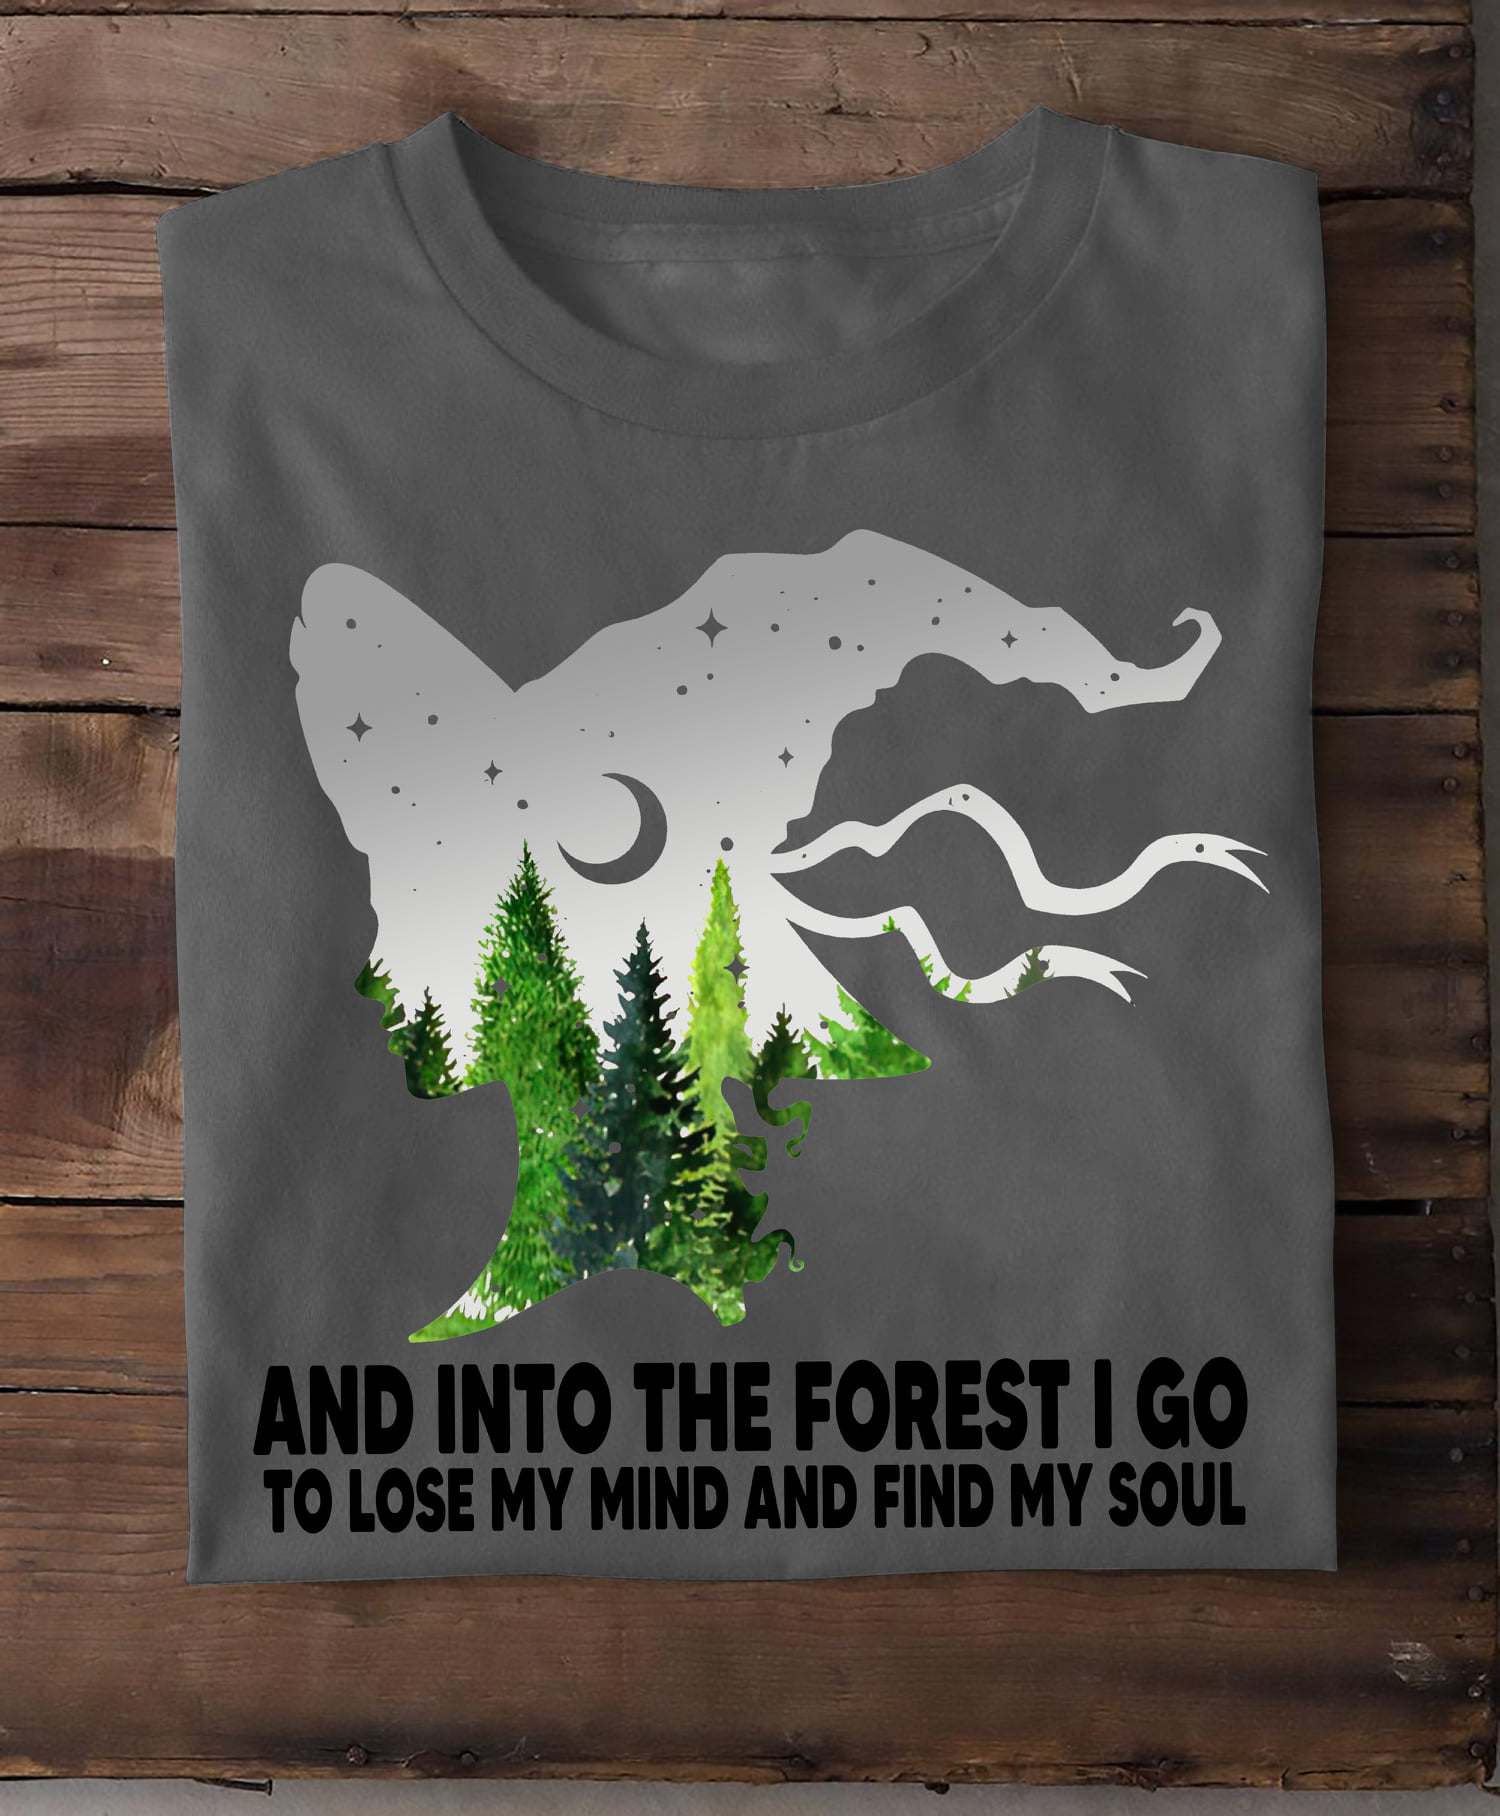 And into the forest I go to lose my mind and find my soul - Natural lover